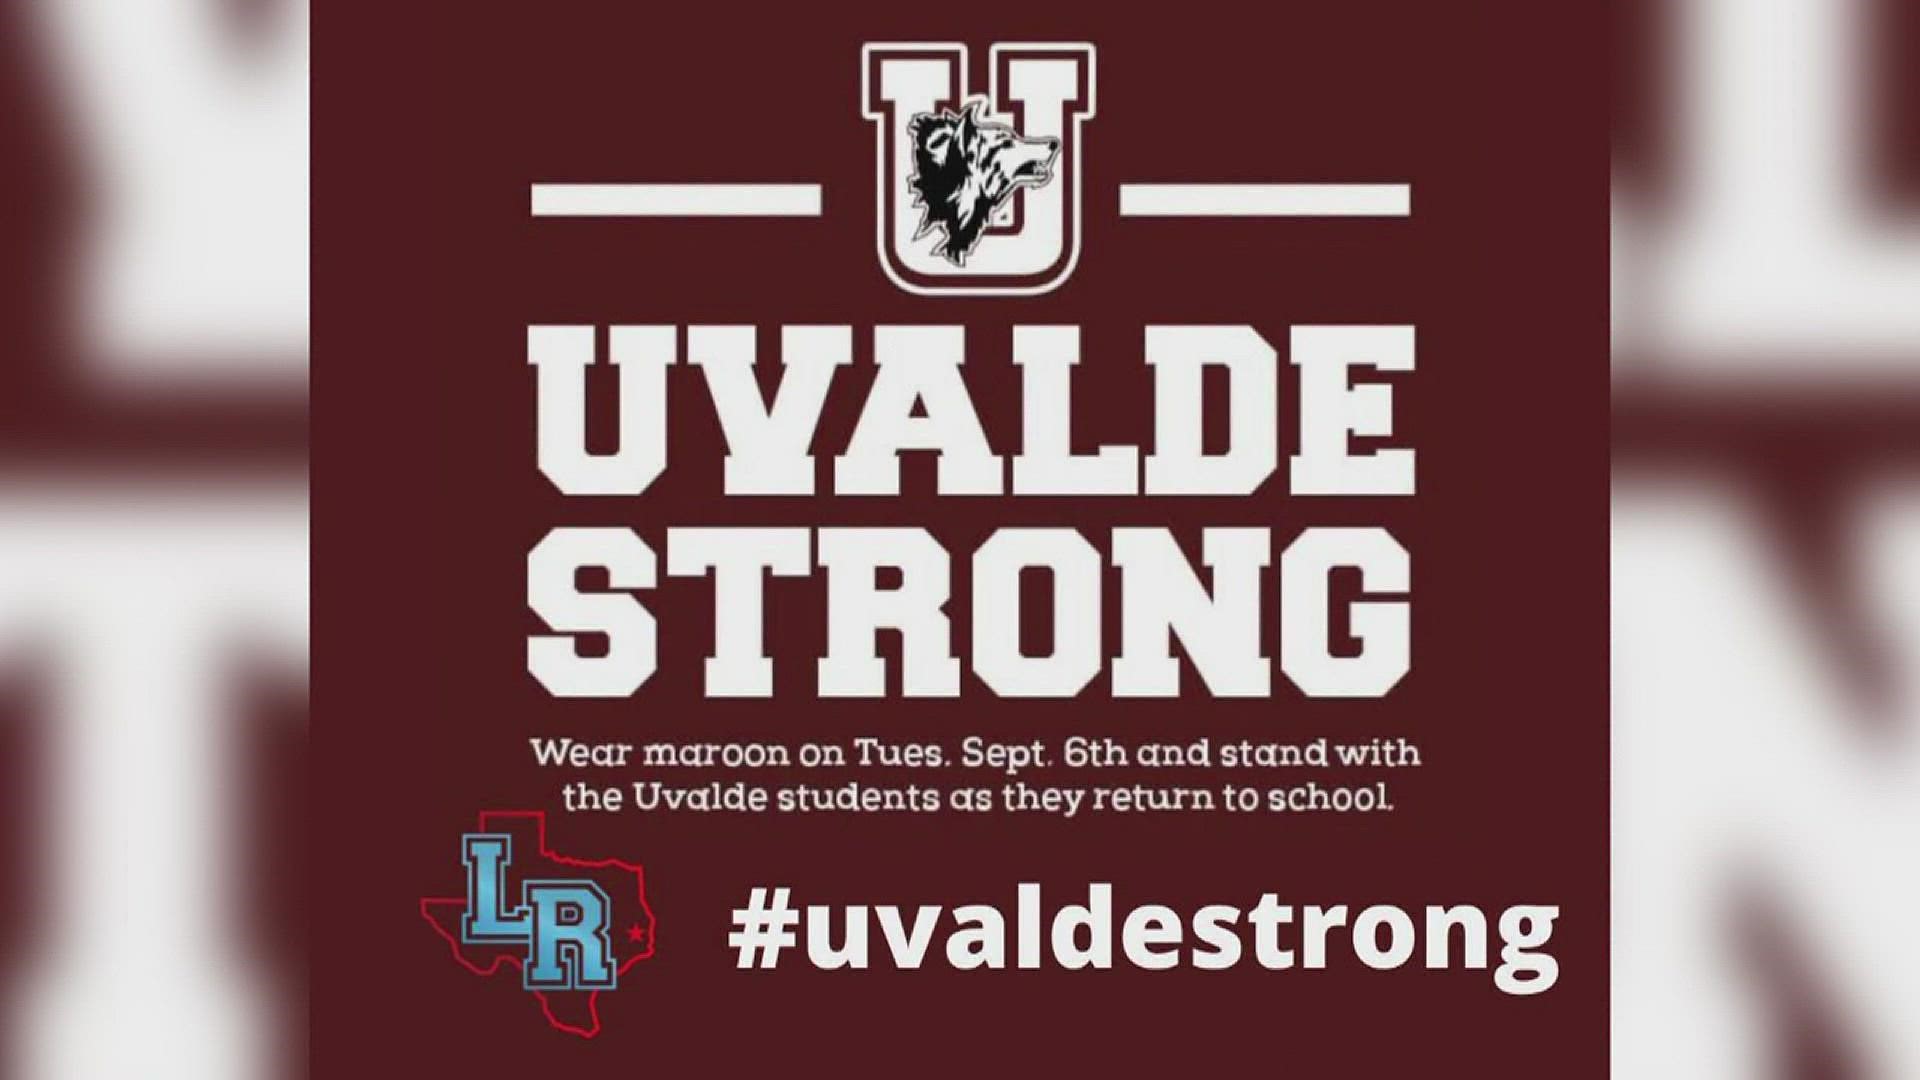 School districts are asking staff and students to stand with them as they stand with Uvalde by wearing maroon and/or white on Tuesday.